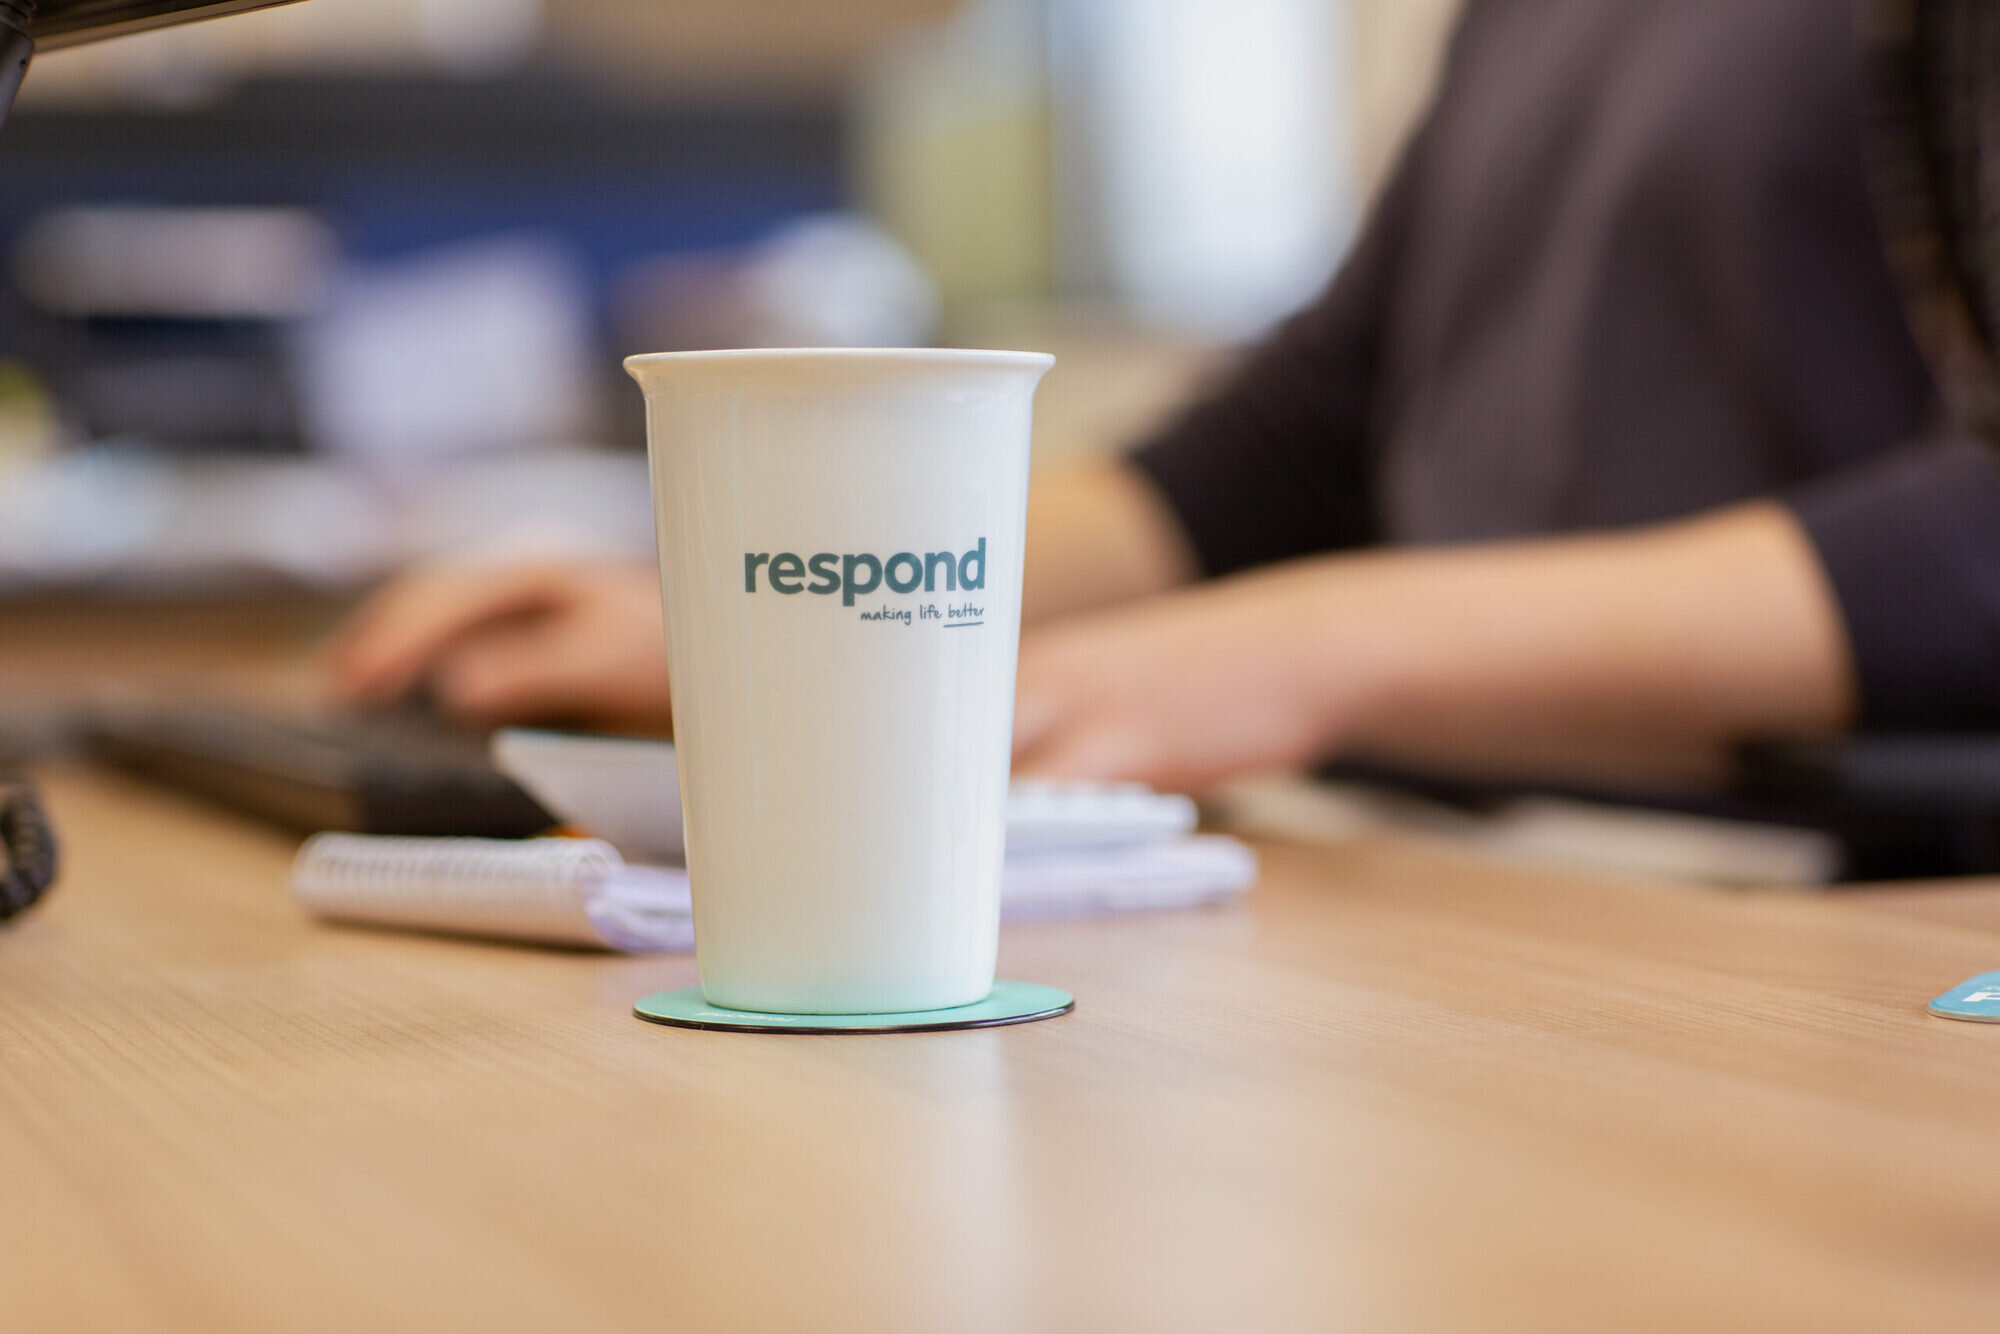 A Respond branded coffee cup sits on a desk with a blurred background of a Respond team member typing on a keyboard.